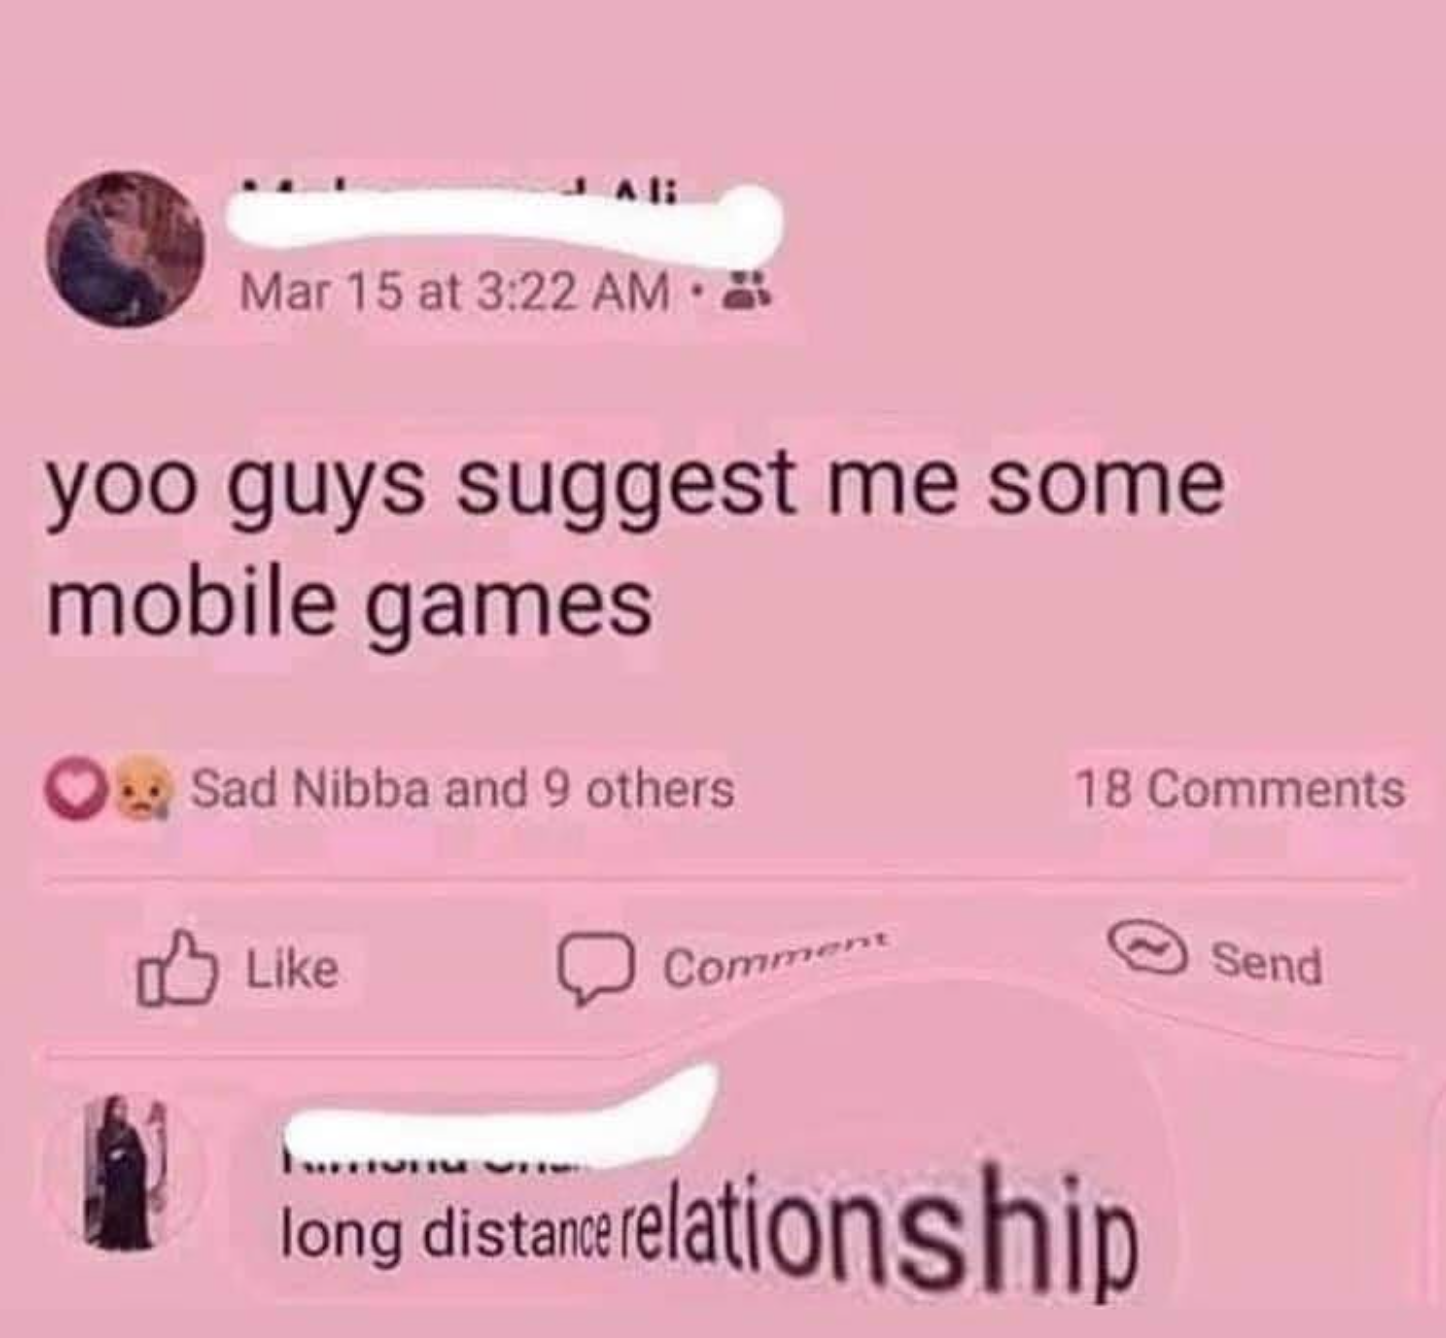 funny gaming memes - im14andthisisdeep - Ai Mar 15 at yoo guys suggest me some mobile games Sad Nibba and 9 others 18 Comment Send long distancerelationship